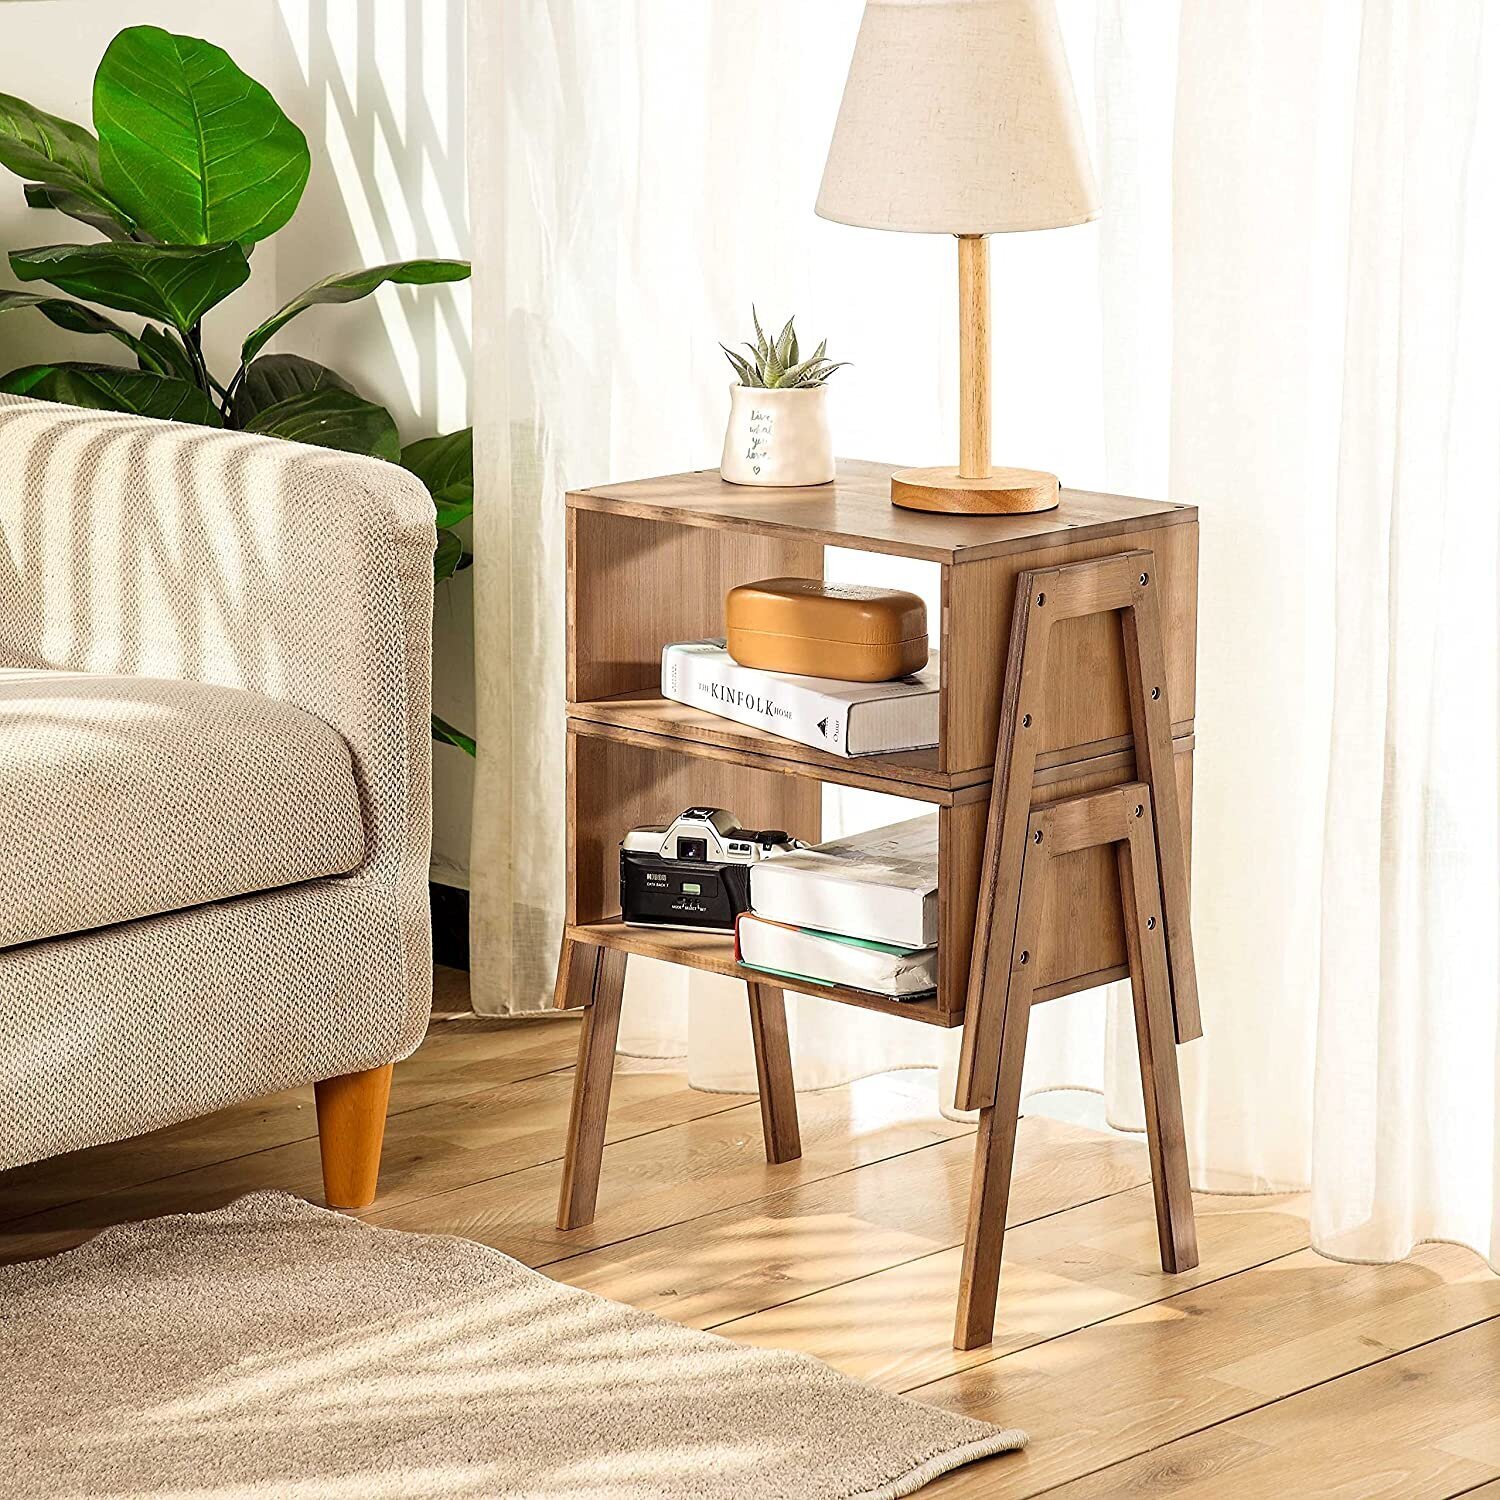 Quirky bamboo end table